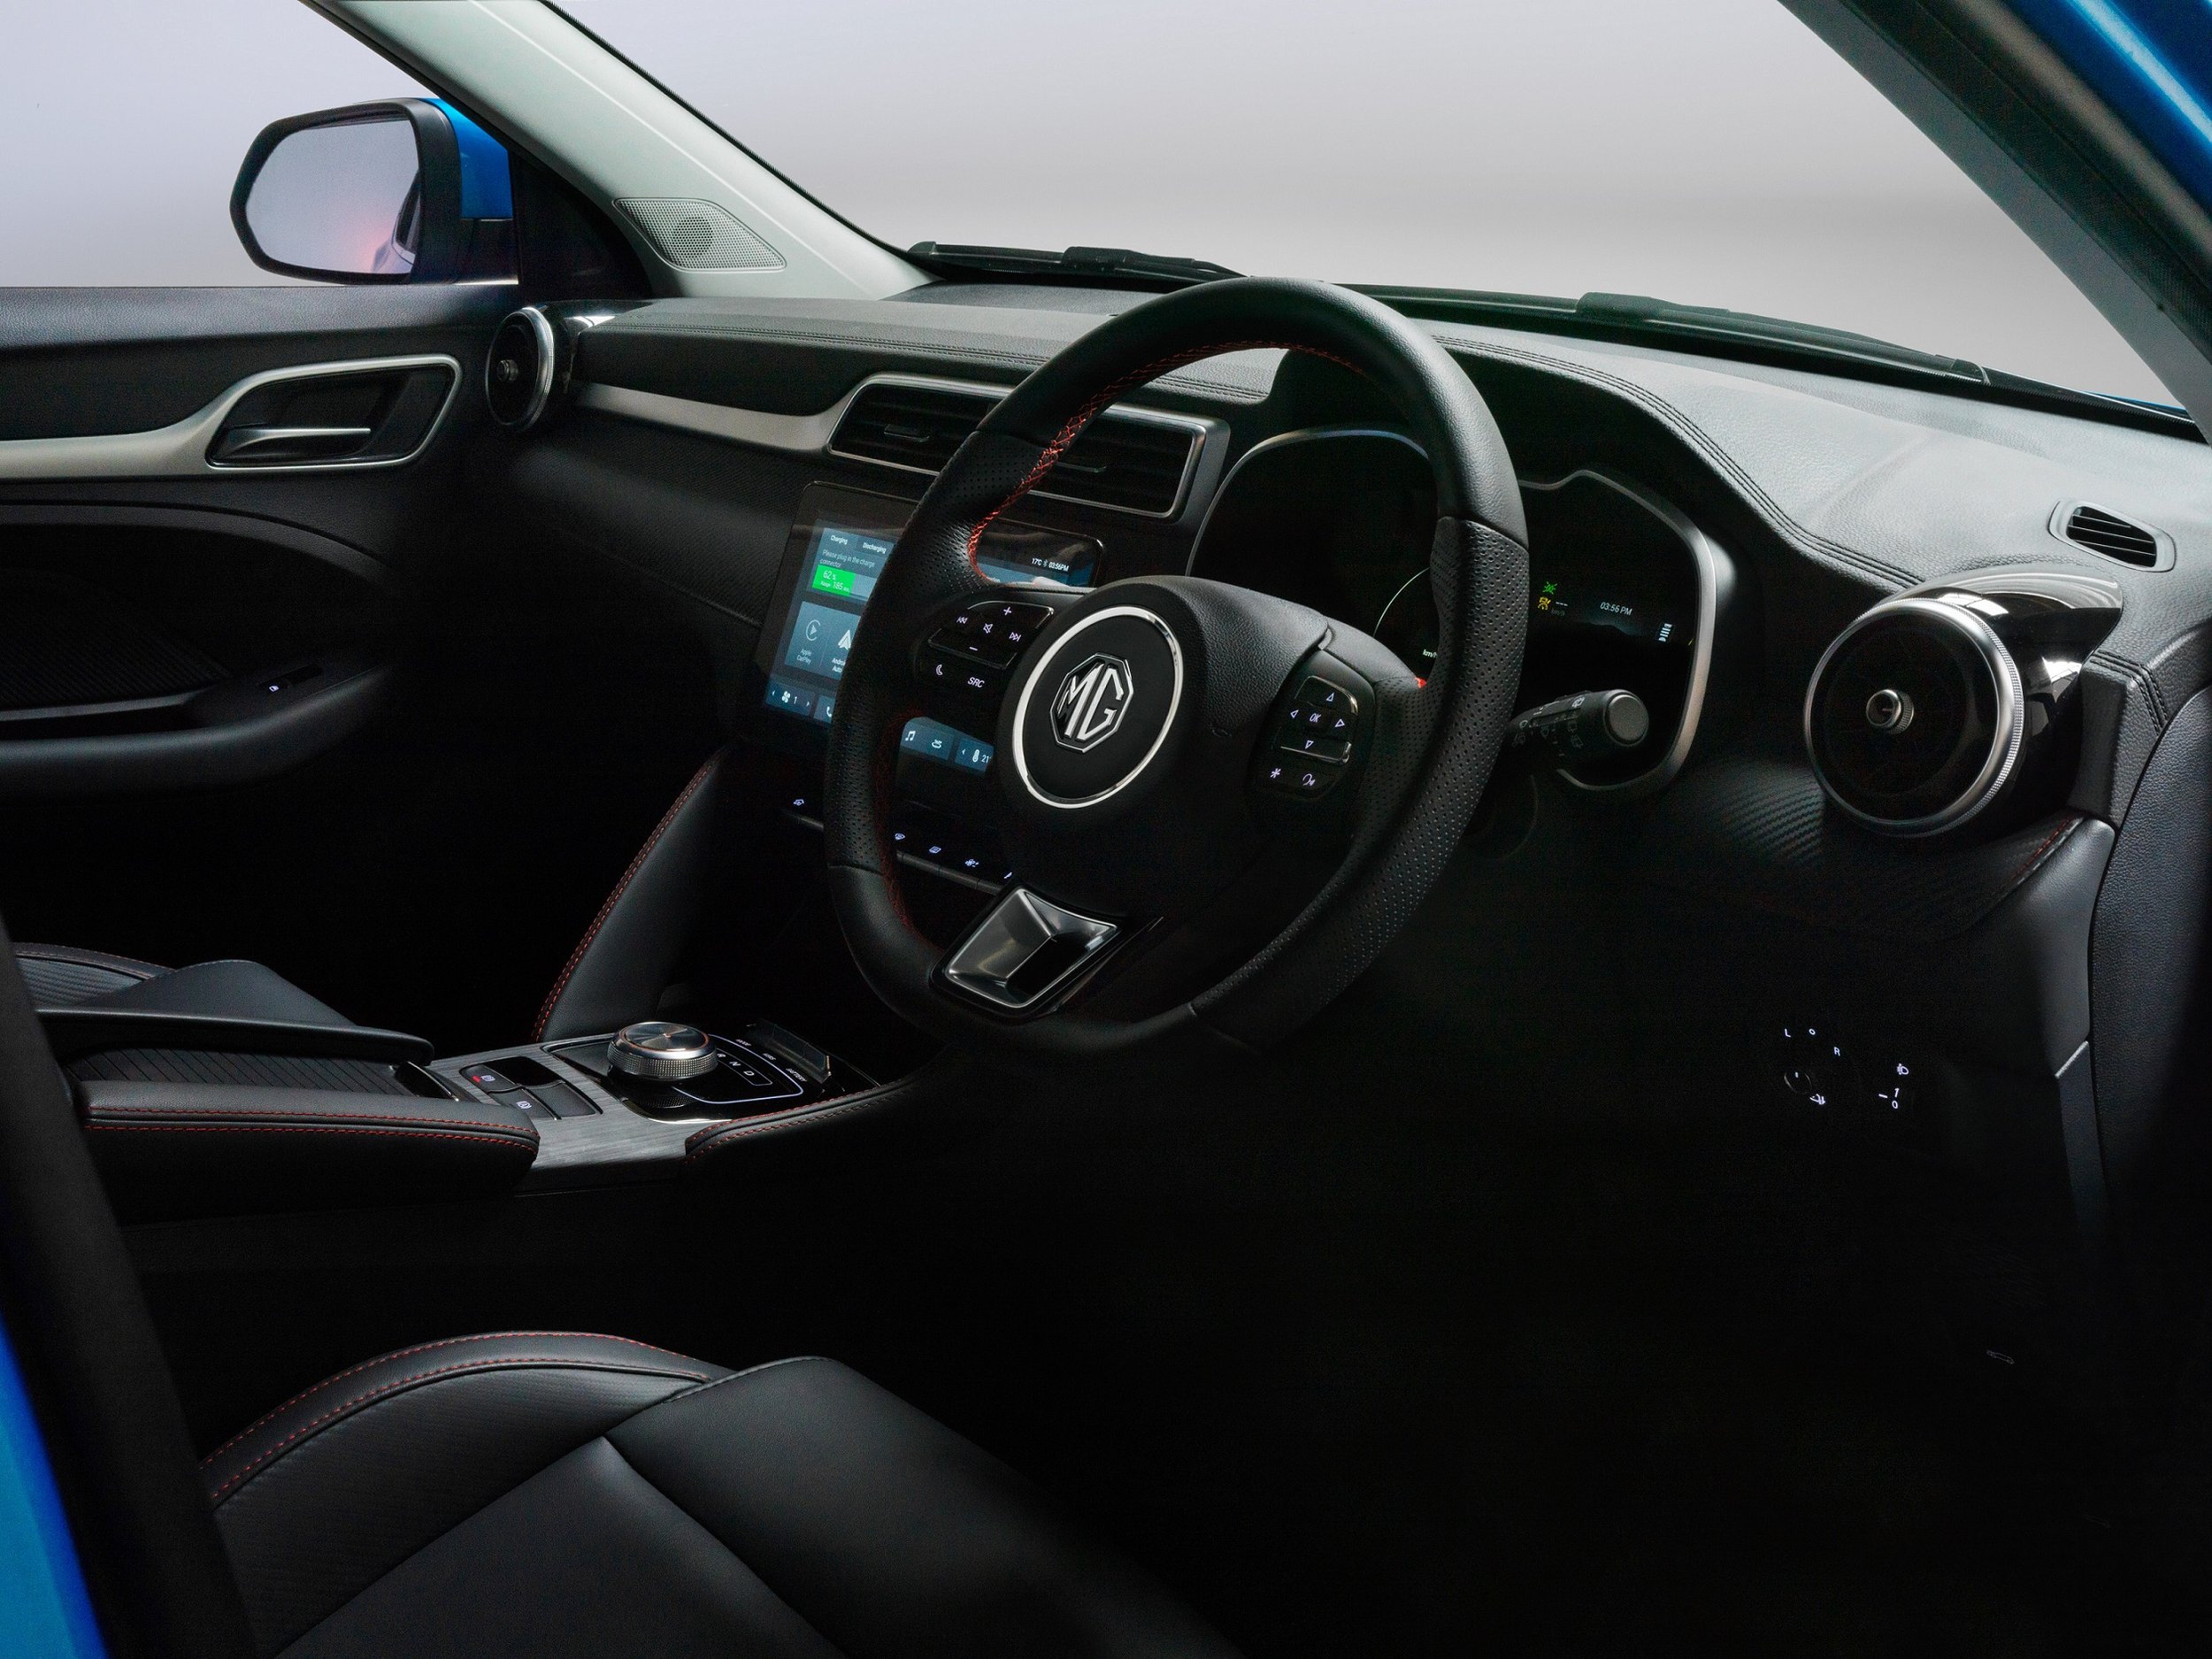 An interior not as polished as Mazda, but nor as dear.